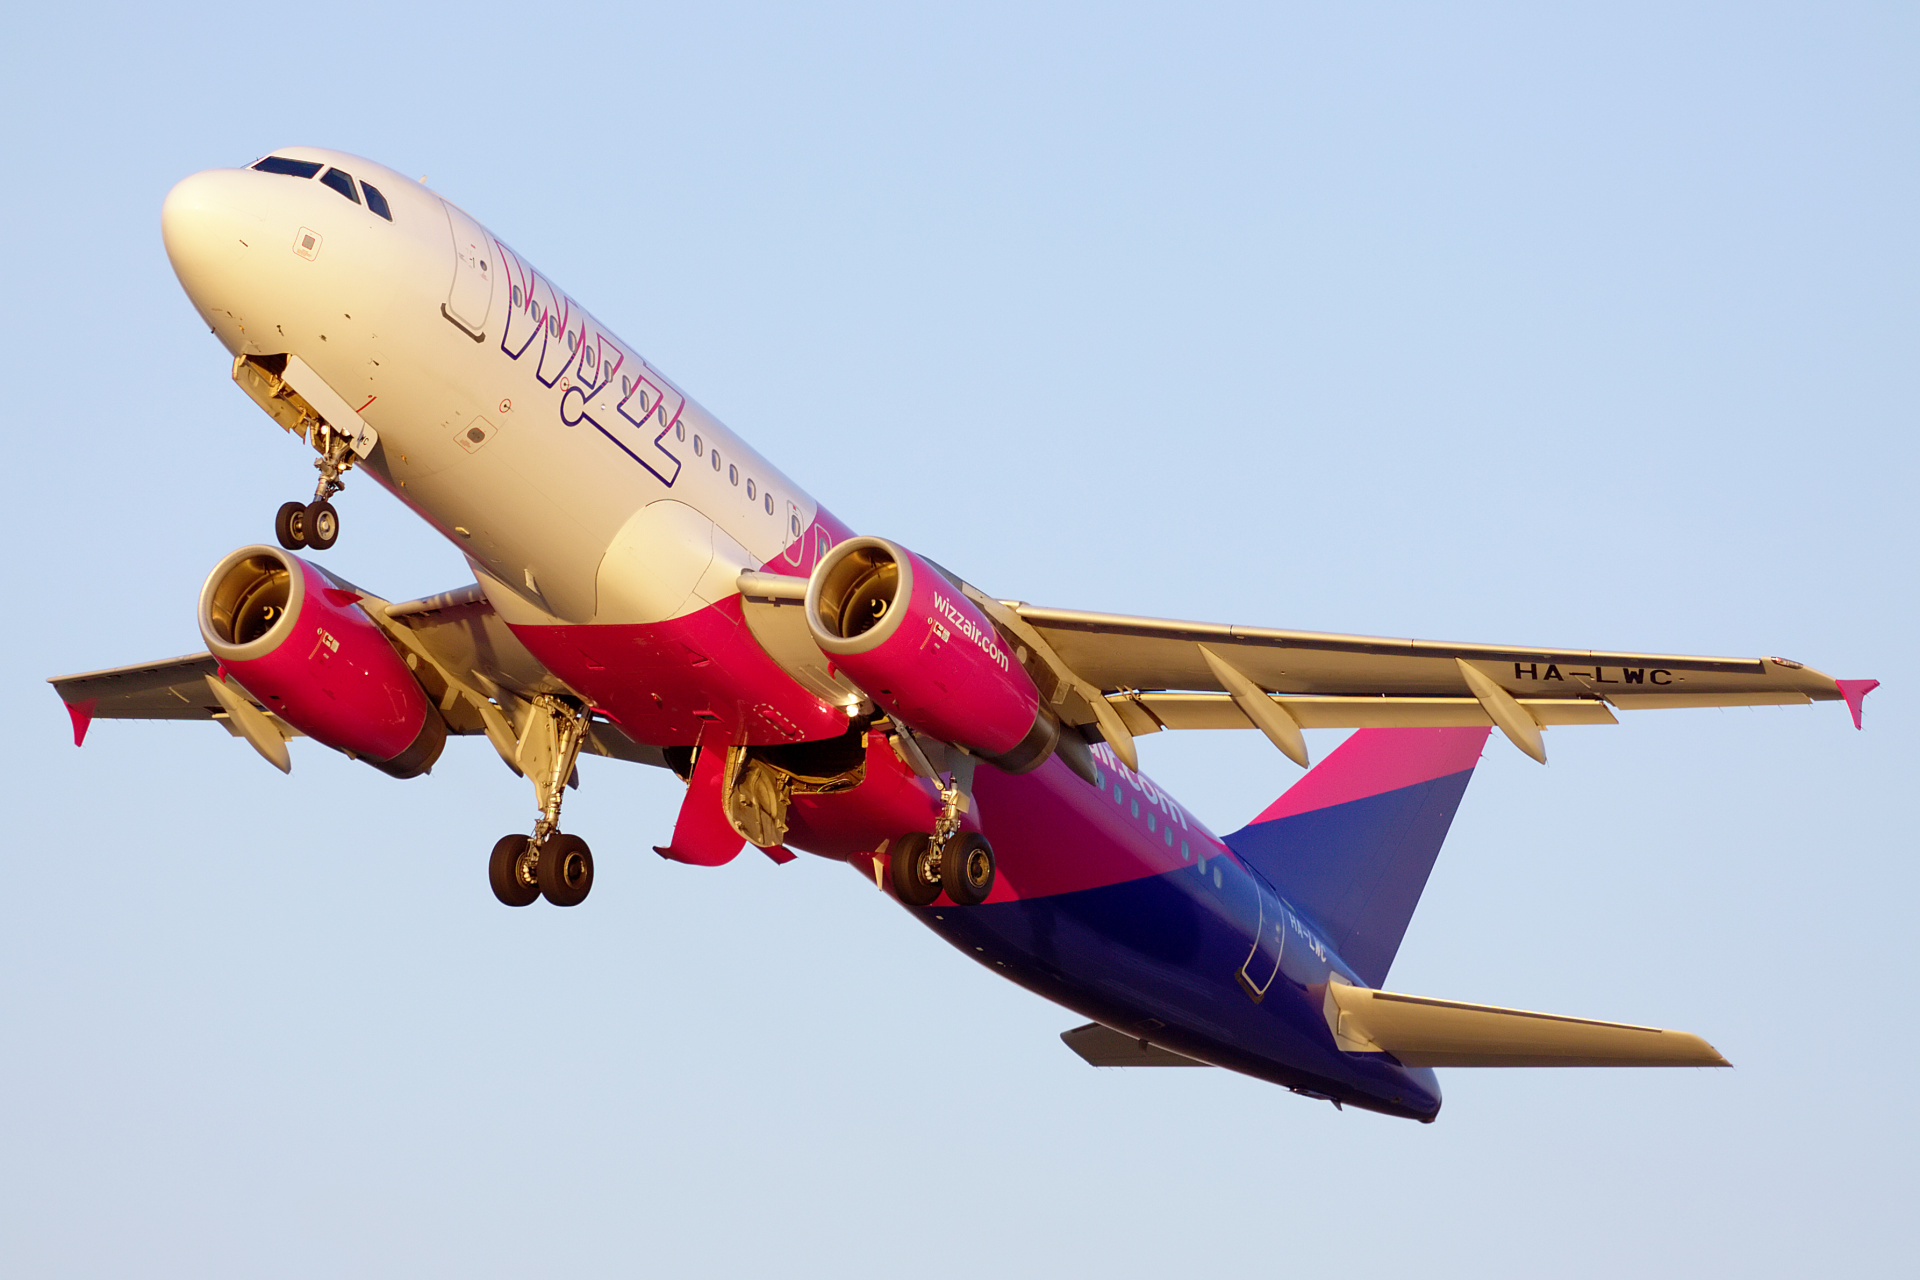 HA-LWC (new livery) (Aircraft » EPWA Spotting » Airbus A320-200 » Wizz Air)